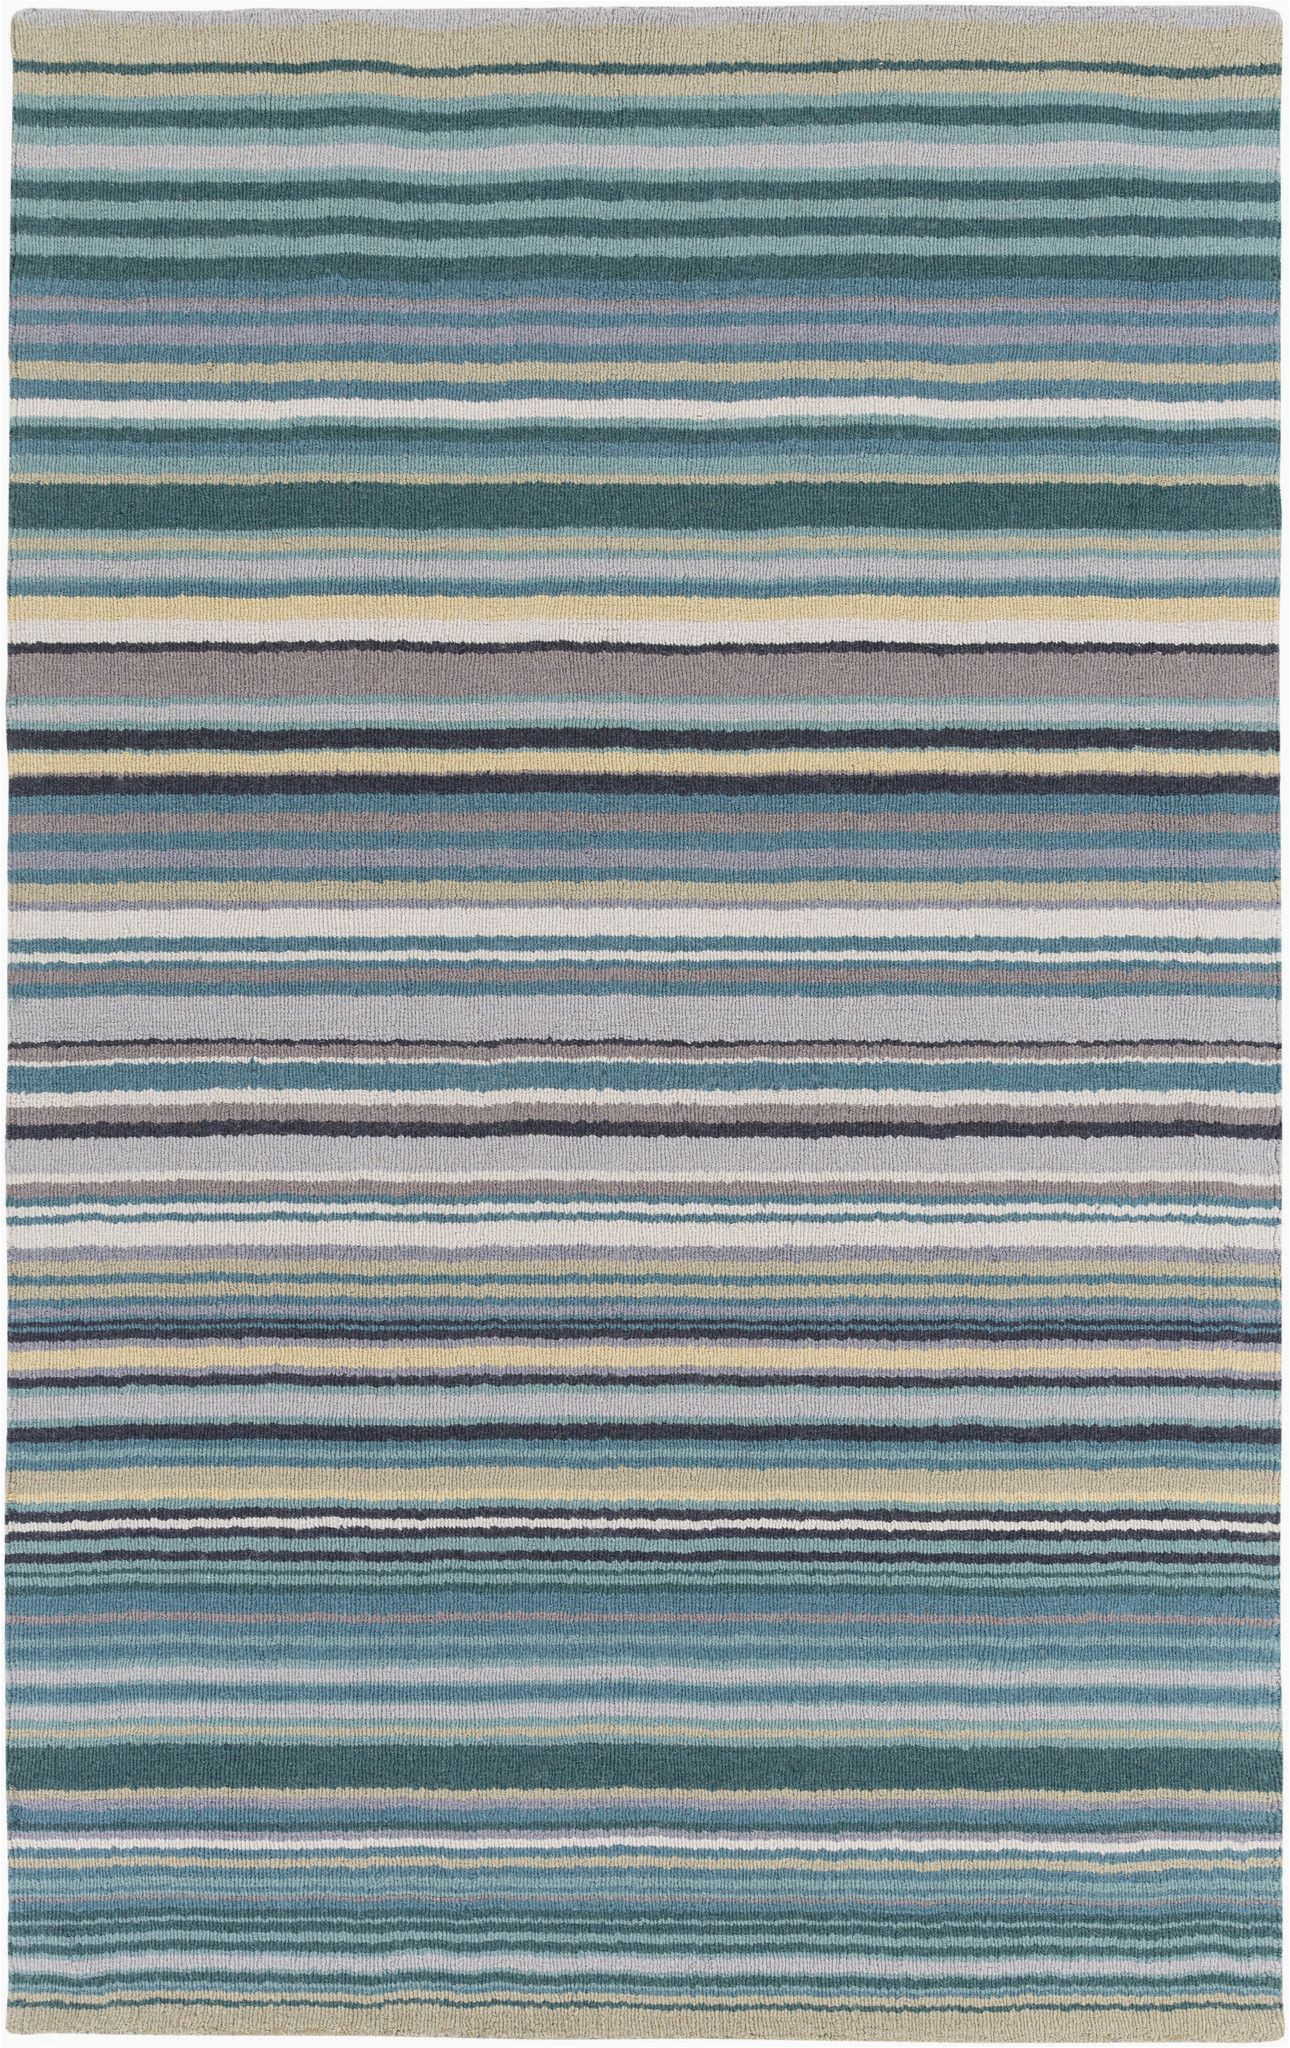 Blue Green Striped Rug Surya Blowout Sale Up to Off M5419 23 Mystique Stripes